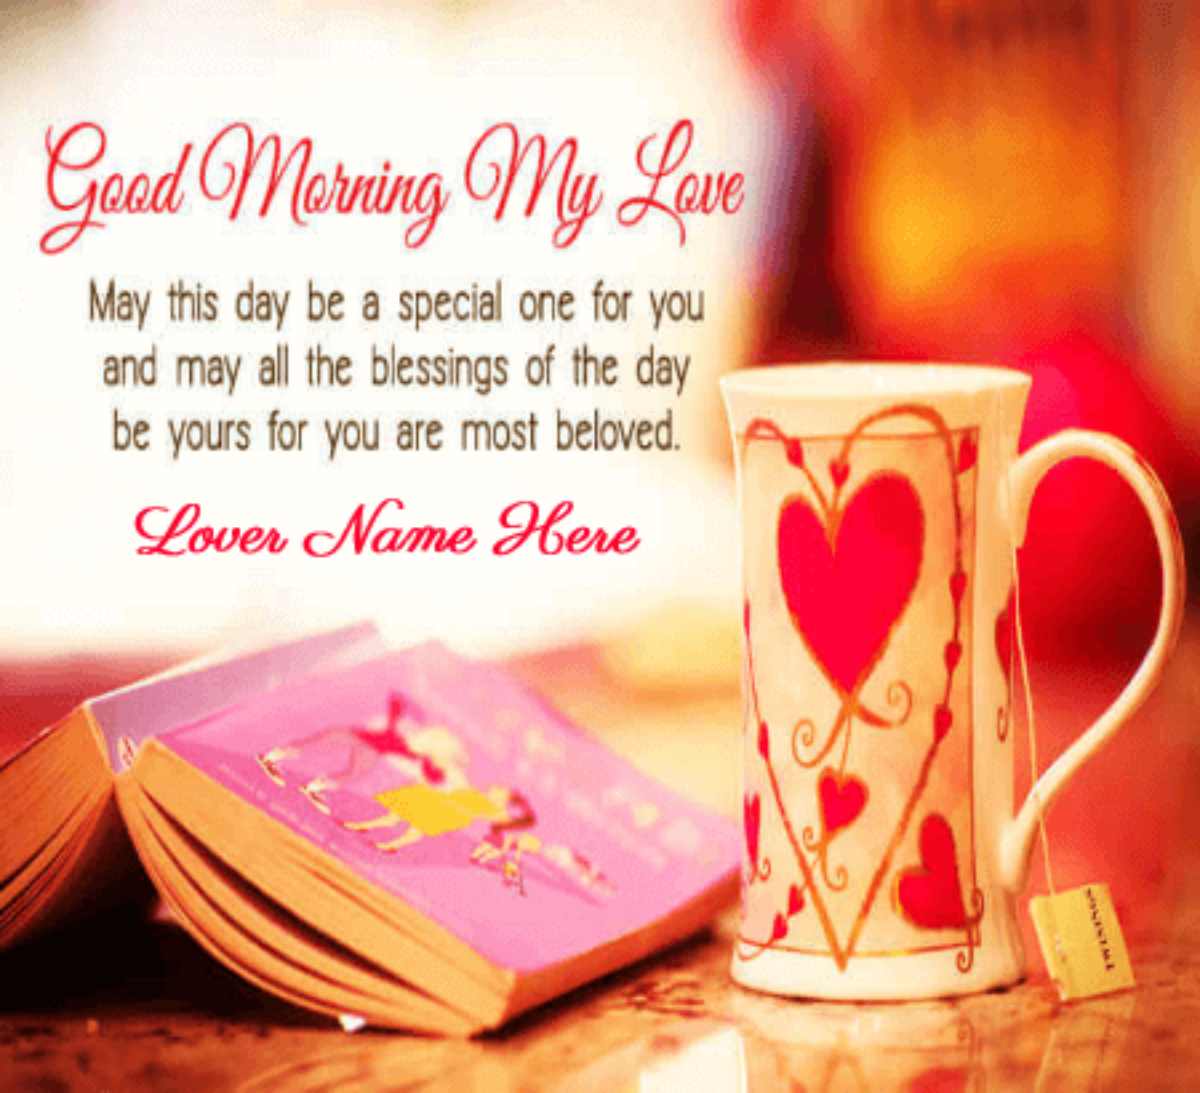 Good Morning My Love Wish - Good Morning Wishes With Name